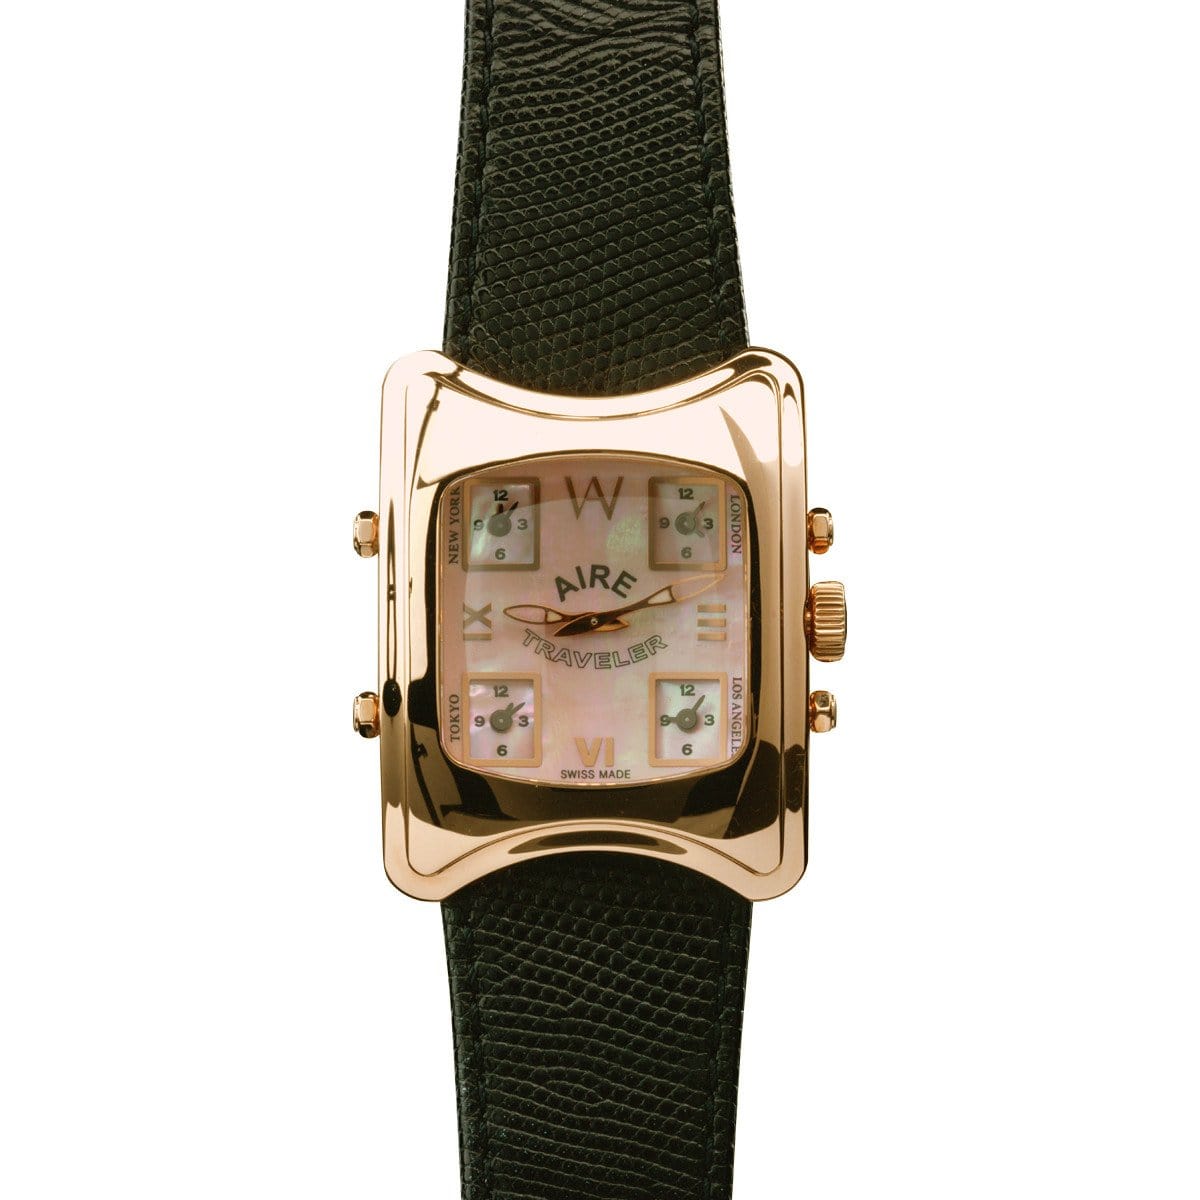 AIRE TRAVELER 5 TIME ZONES WATCH - Chris Aire Fine Jewelry & Timepieces